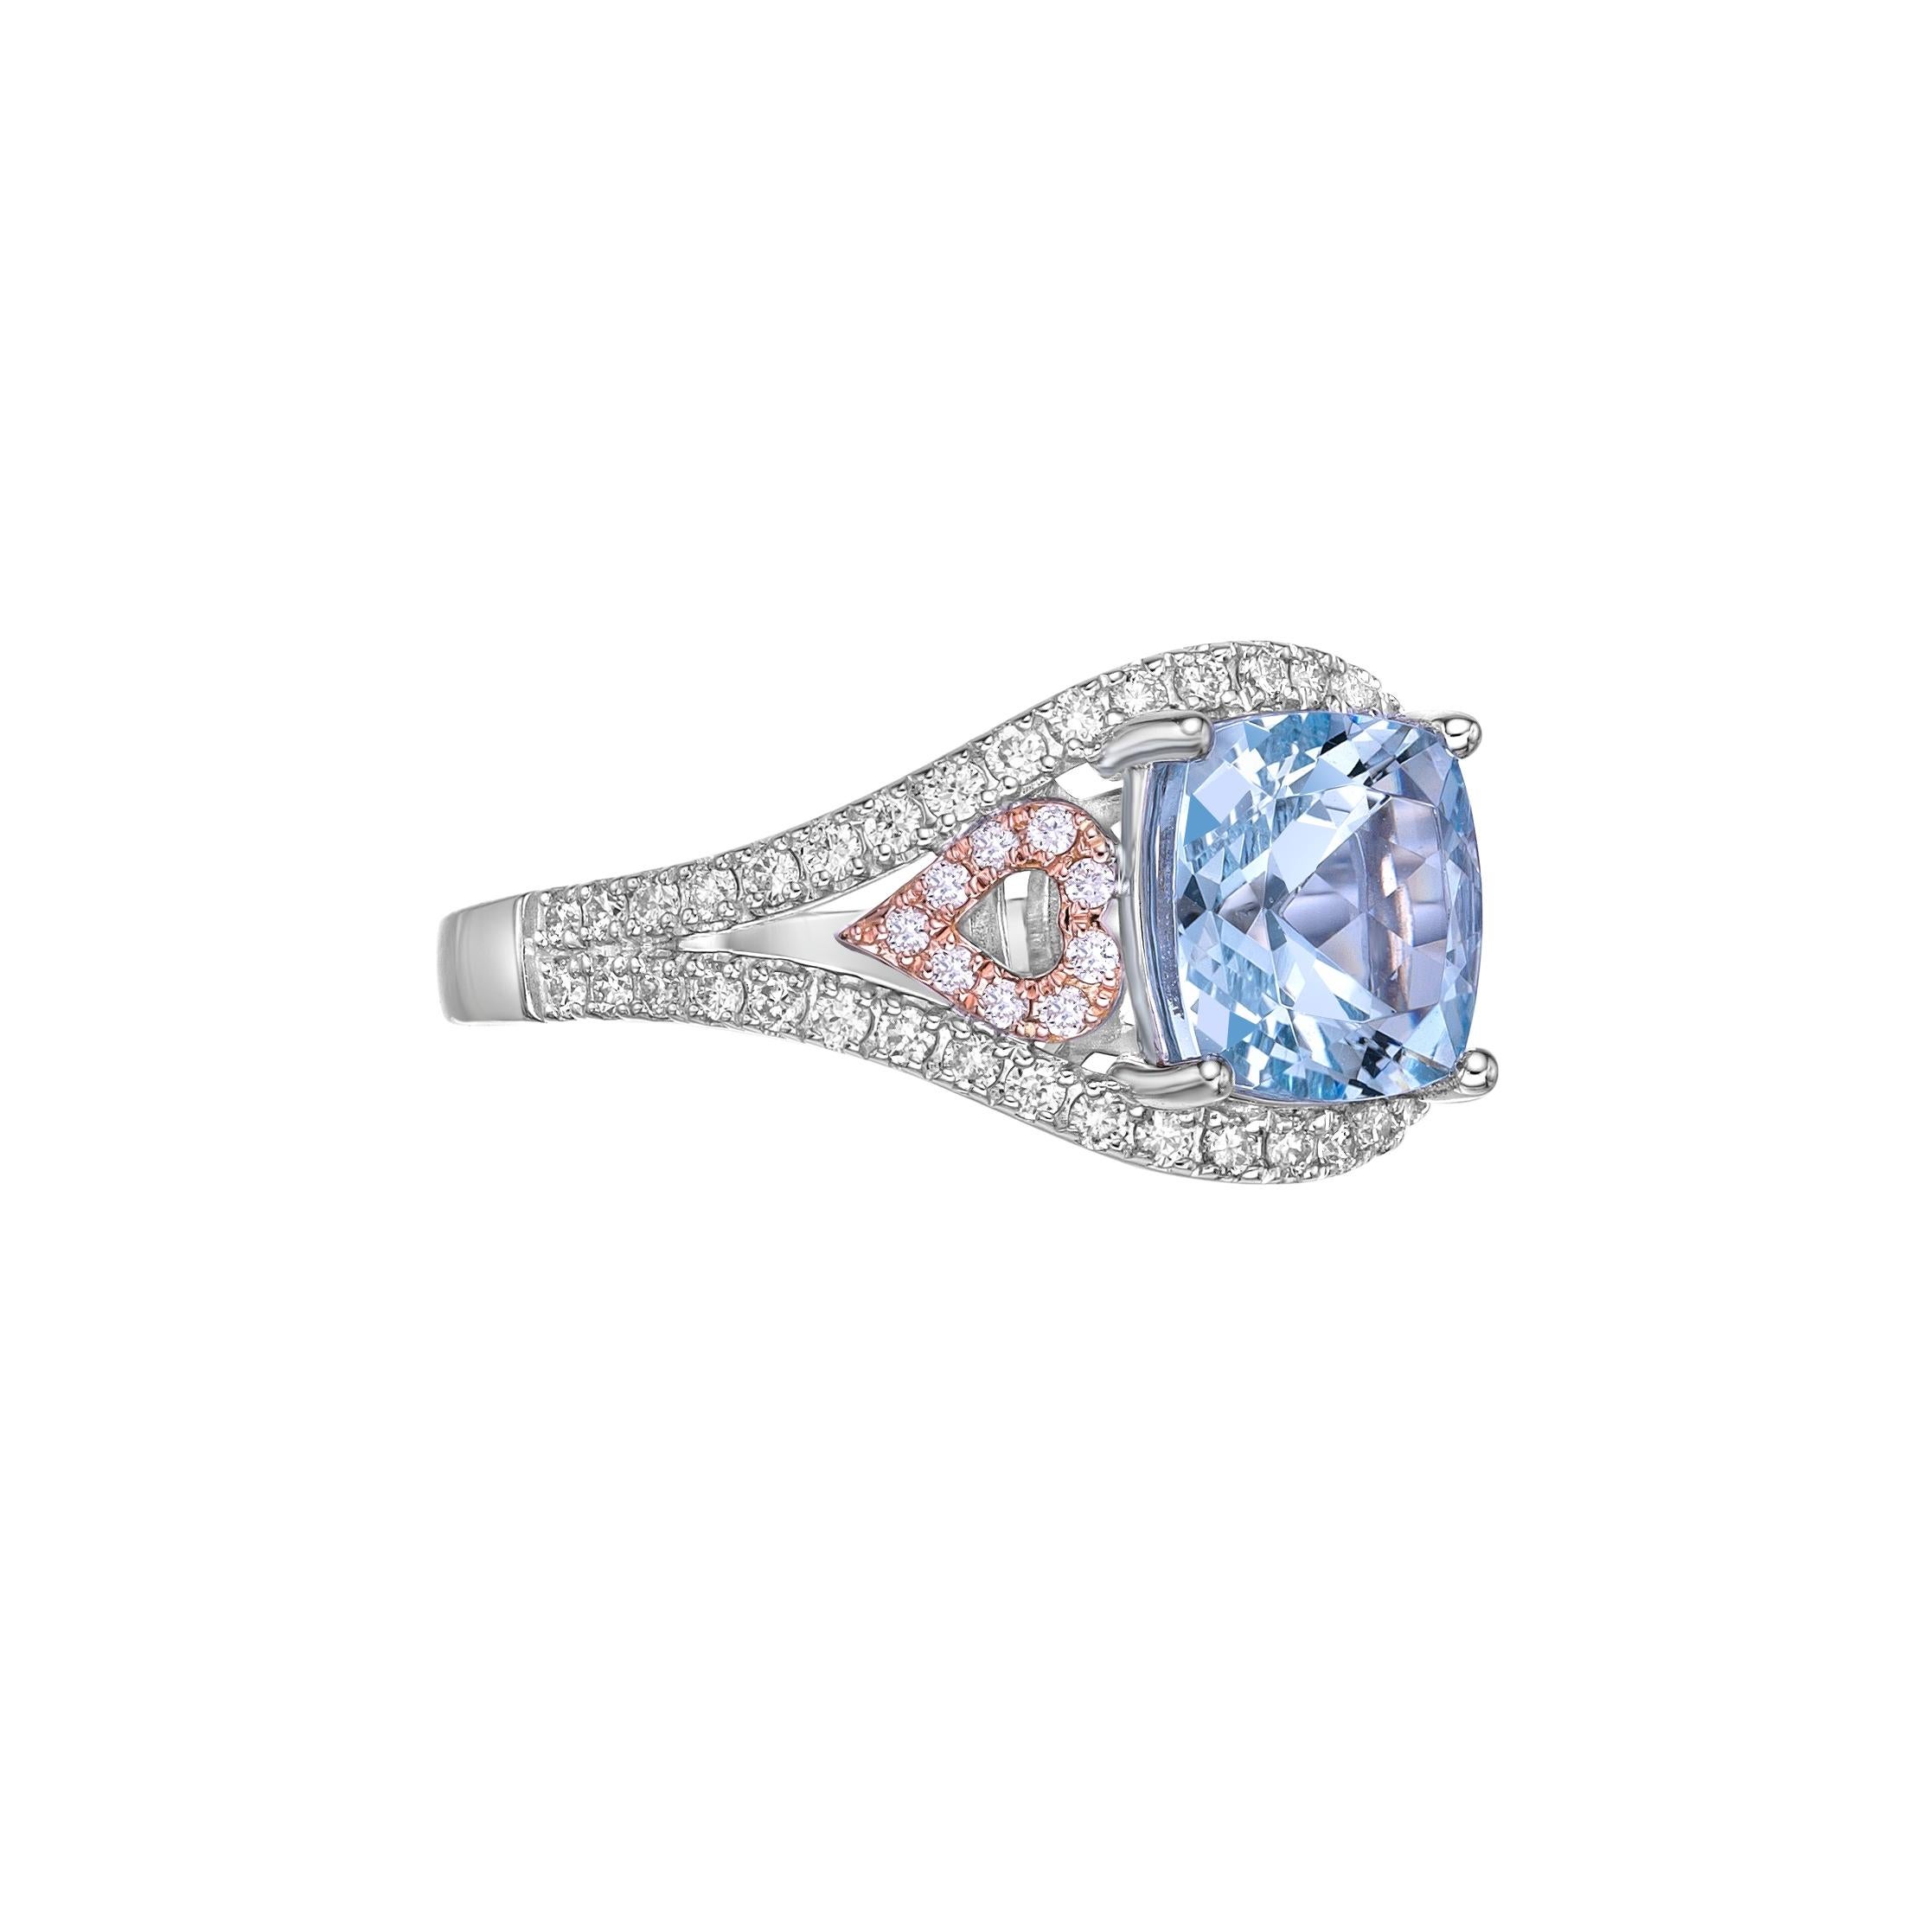 This collection features an array of Aquamarines with an icy blue hue that is as cool as it gets! Accented with Diamonds this ring is made in white rose gold and present a classic yet elegant look.
  
Aquamarine Fancy Ring in 18Karat White Rose Gold